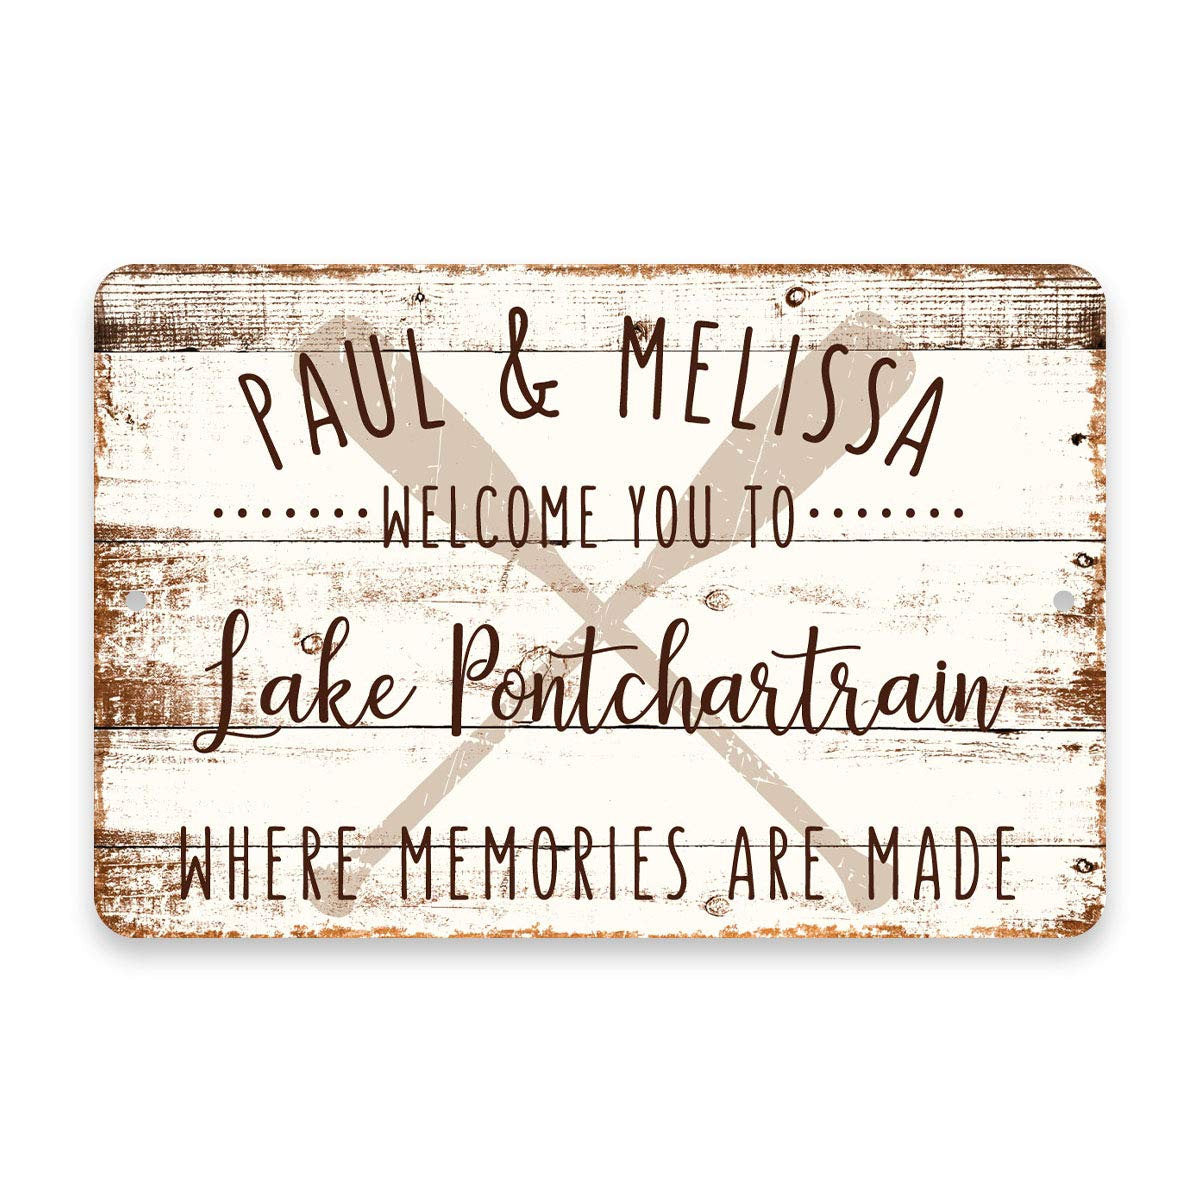 Personalized Welcome to Lake Pontchartrain Where Memories are Made Sign - 8 X 12 Metal Sign with Wood Look